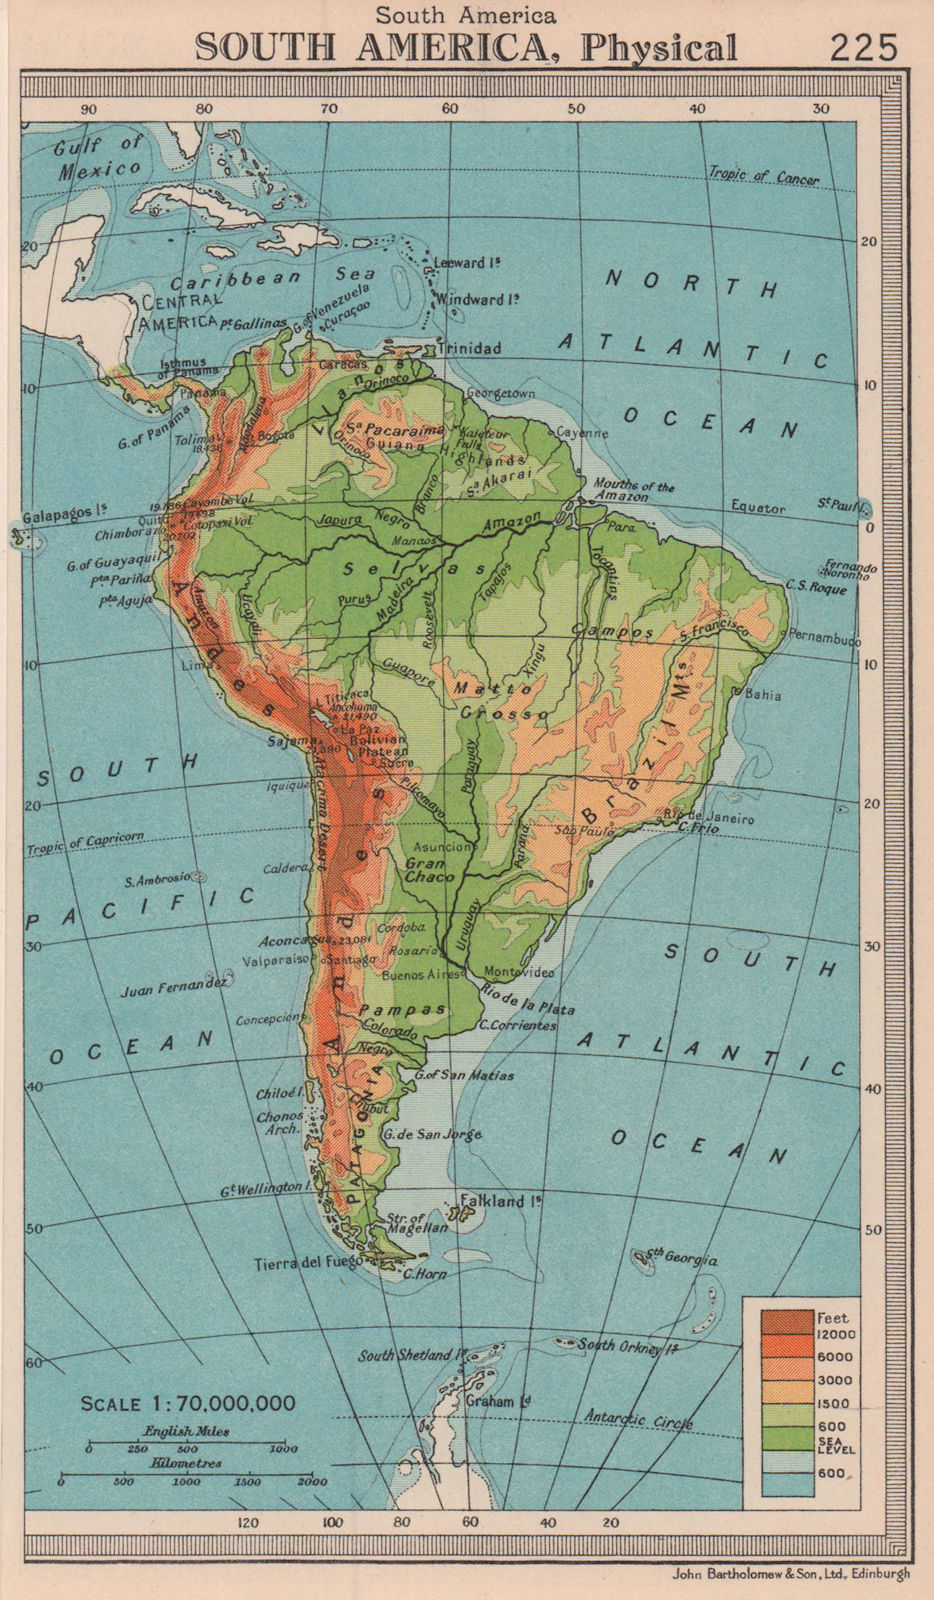 Associate Product South America - Physical. BARTHOLOMEW 1949 old vintage map plan chart